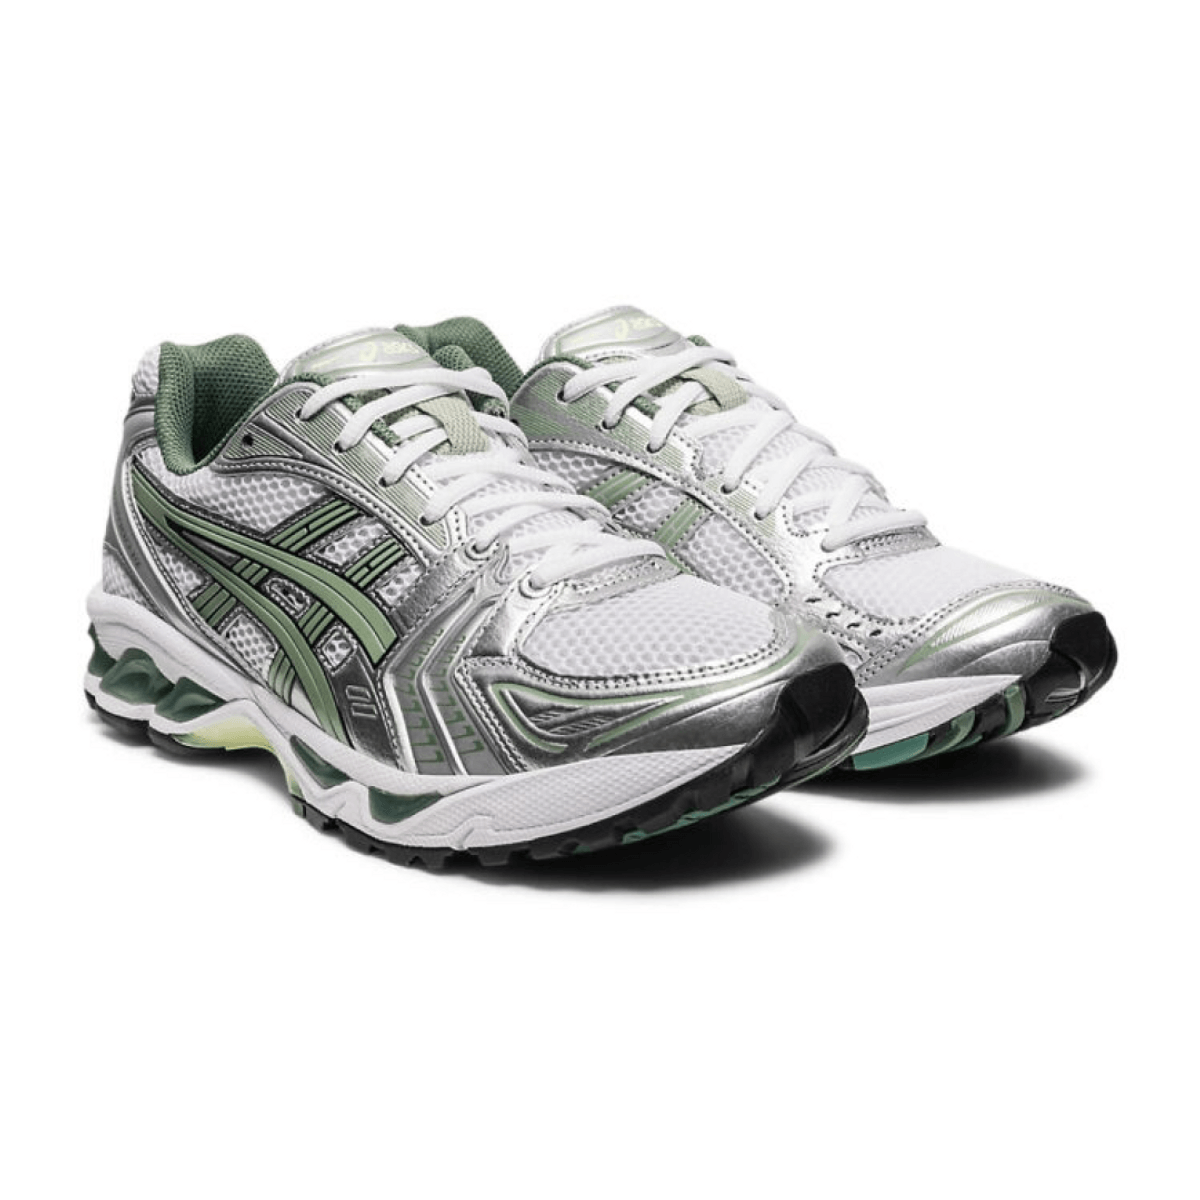 The ASICS Gel-Kayano 14 Is The Perfect Comfort Sneaker